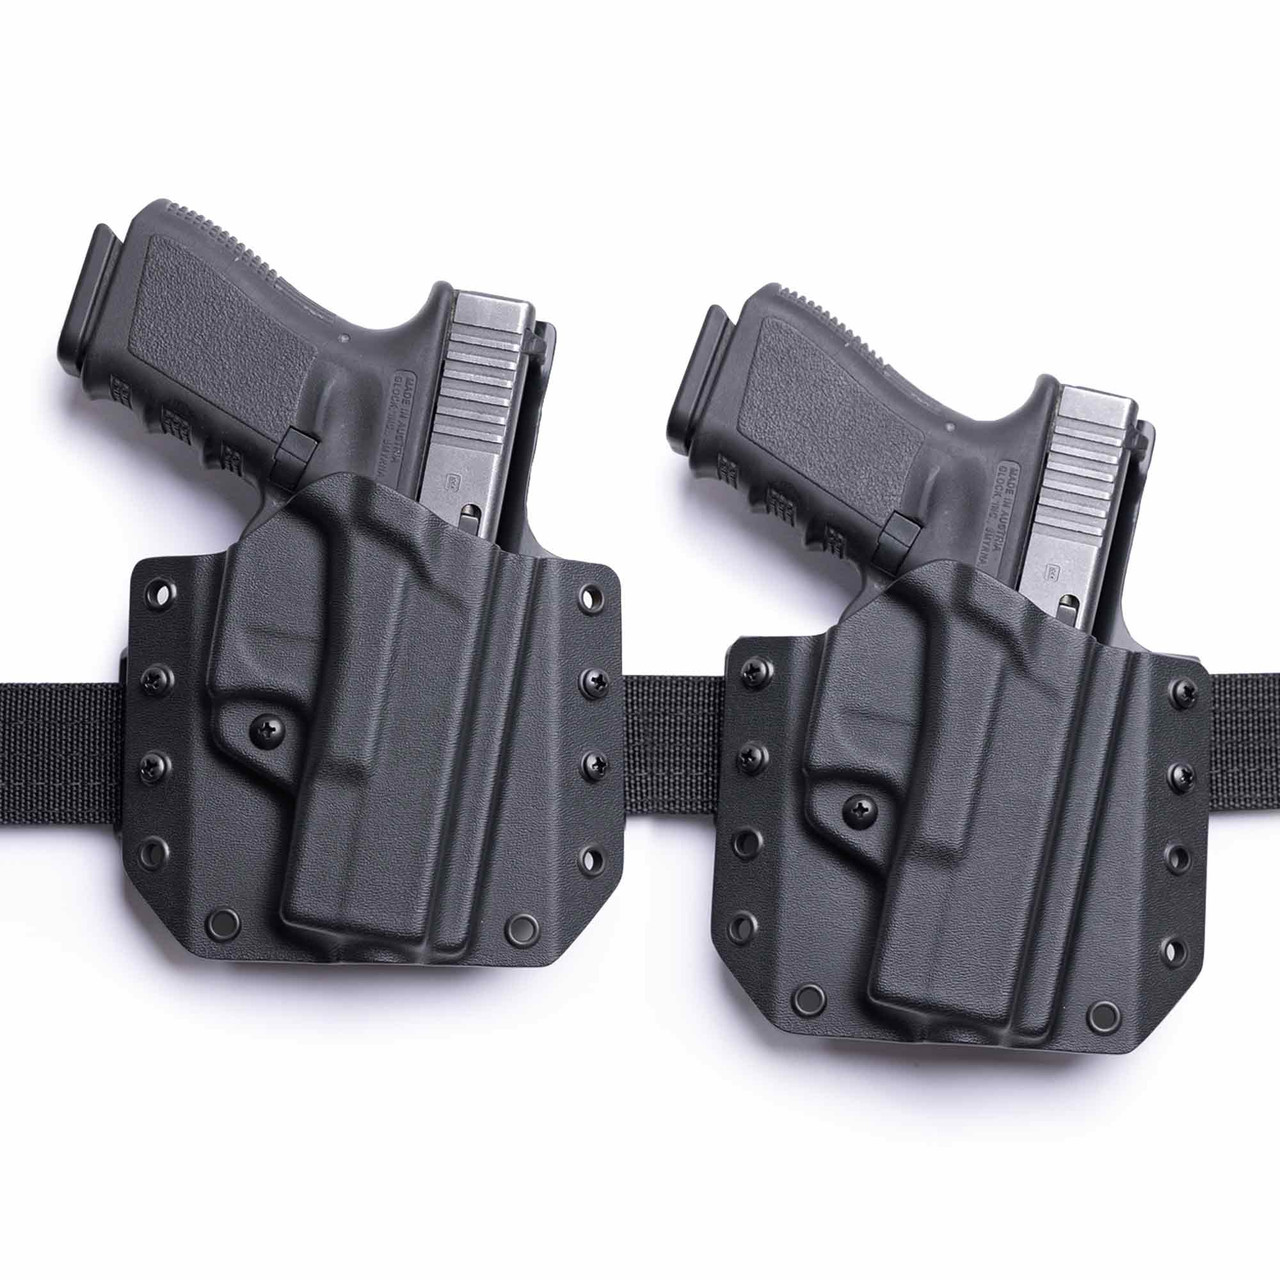 Graphic of two LightDraw holsters depicting adjustable ride height.